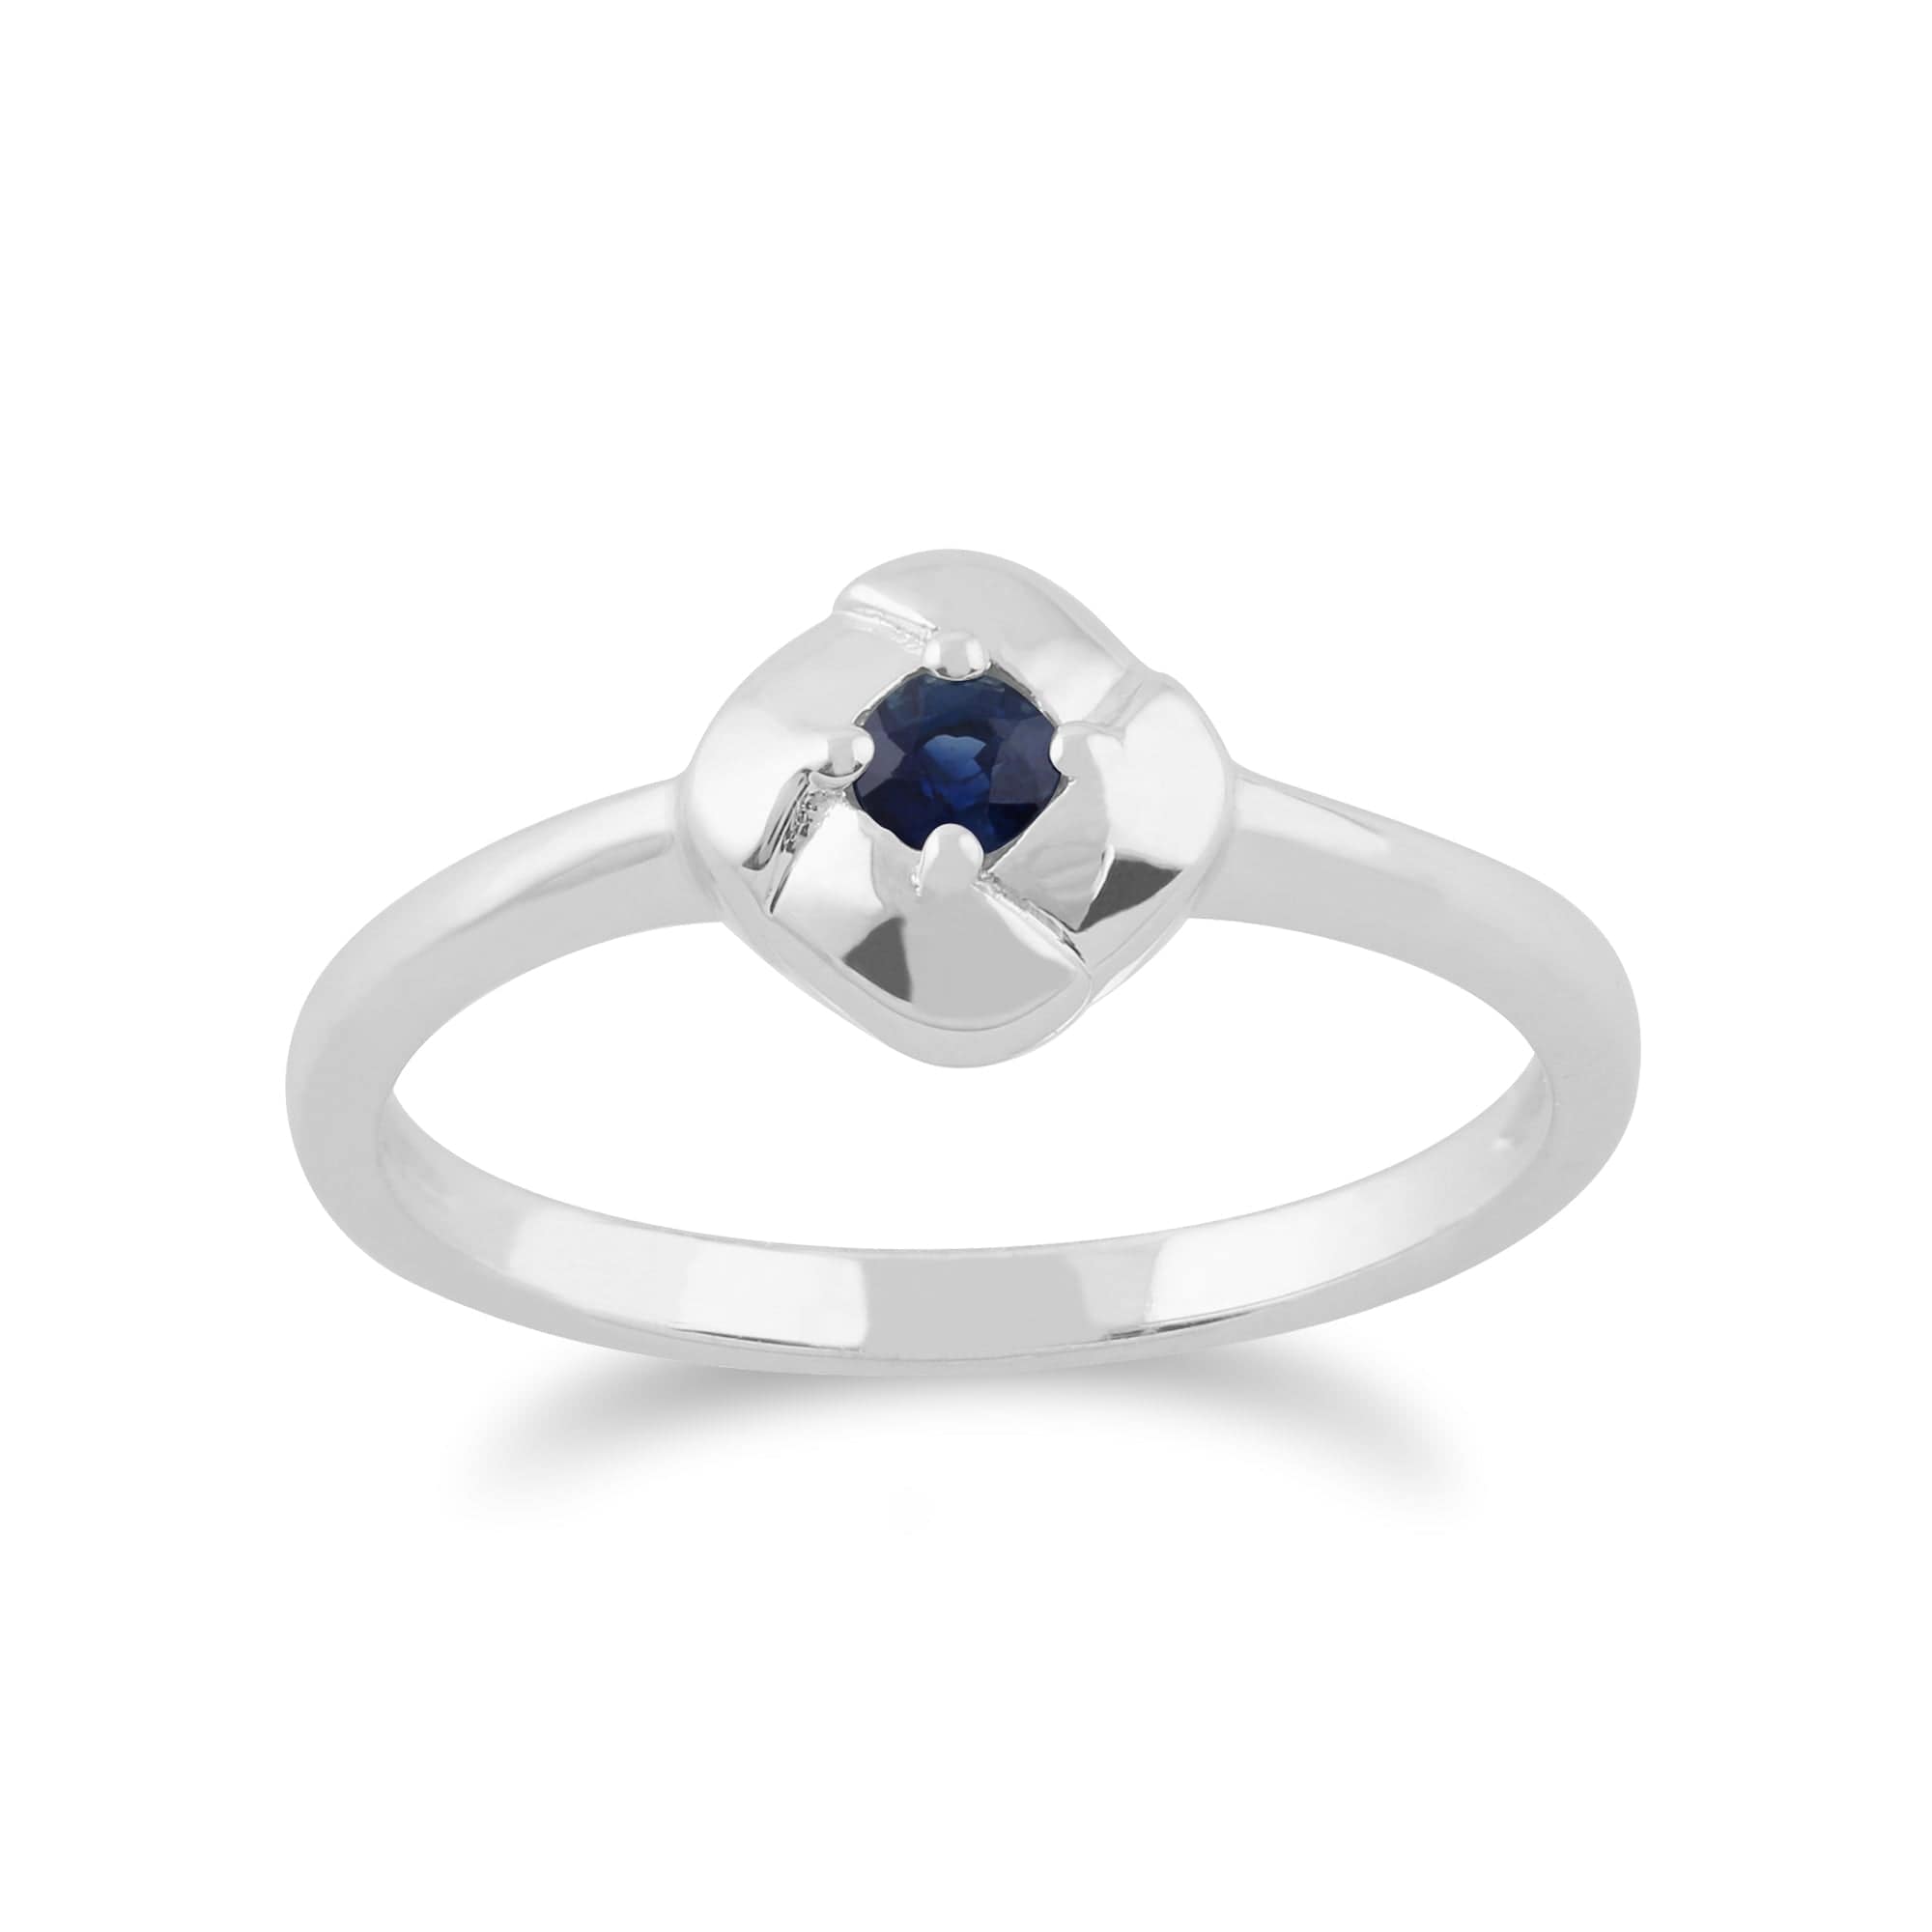 Gemondo 925 Sterling Silver 0.13ct Sapphire Square Crossover Ring Image